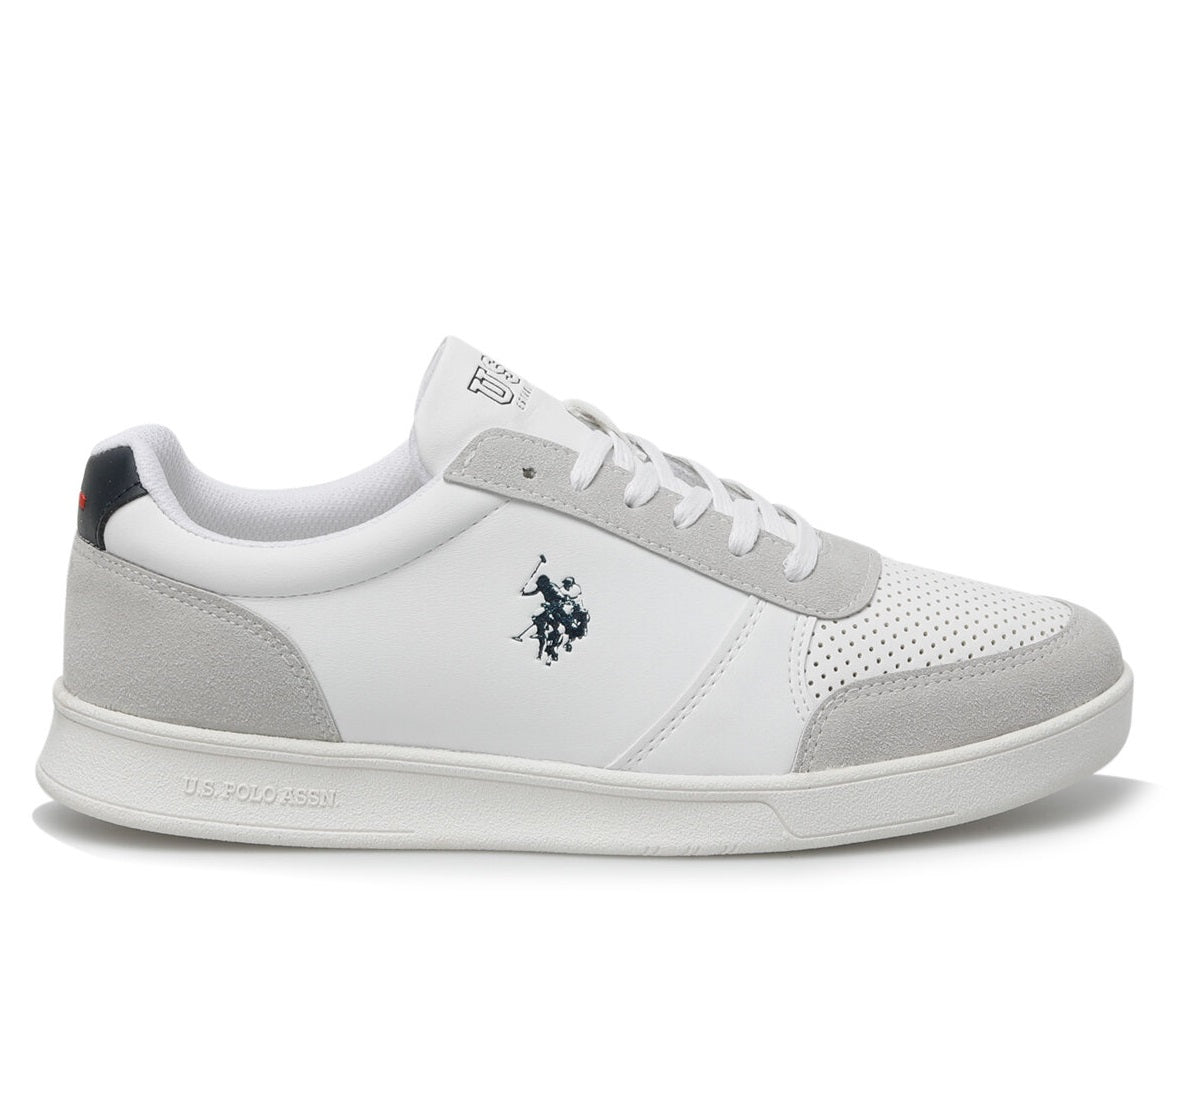 CHAUSSURE BLANCHE FUGA - 101543346